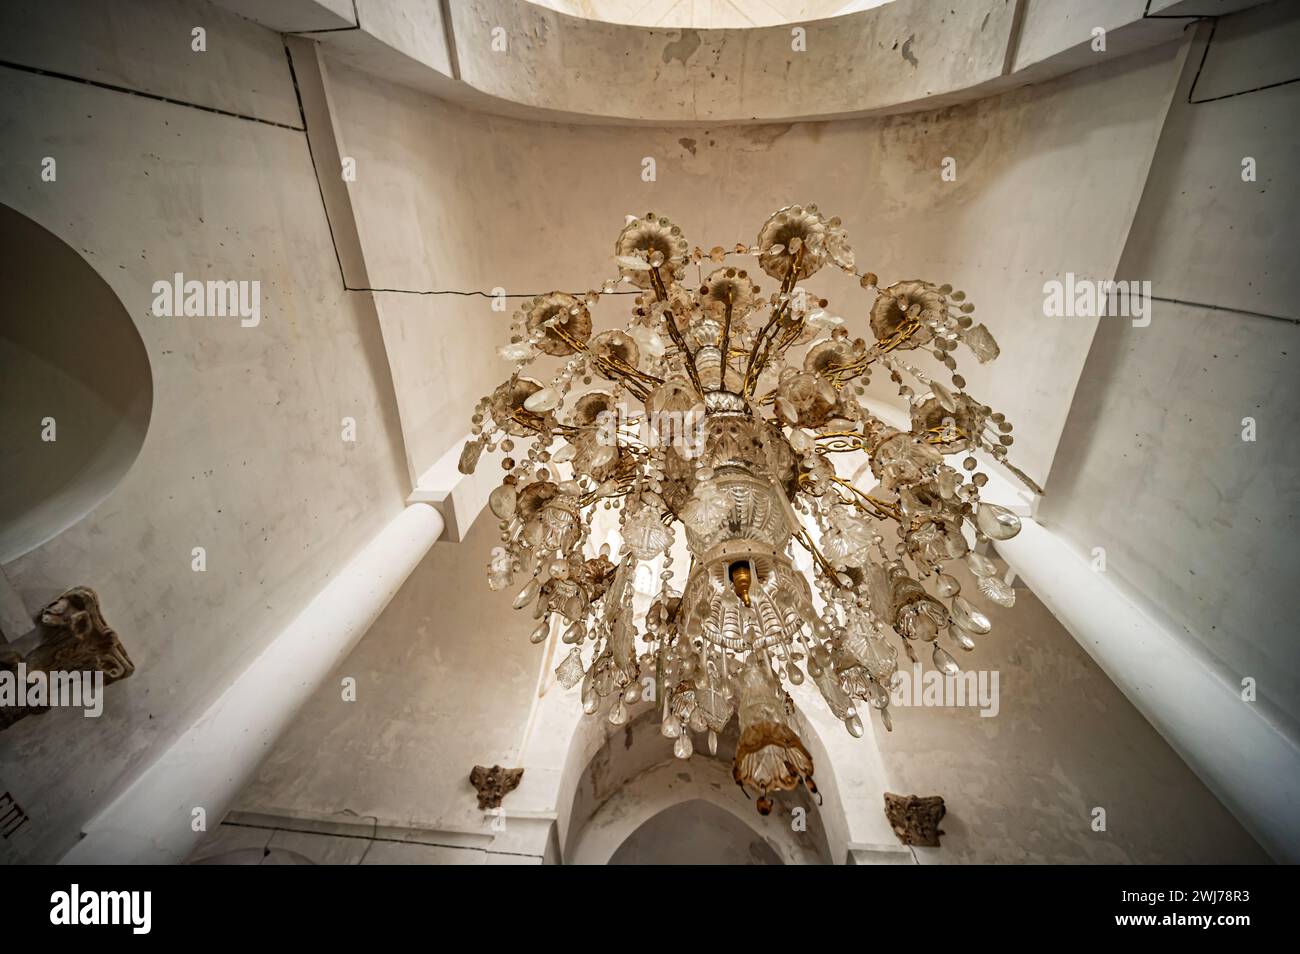 Ceiling with a grand glass chandelier Stock Photo